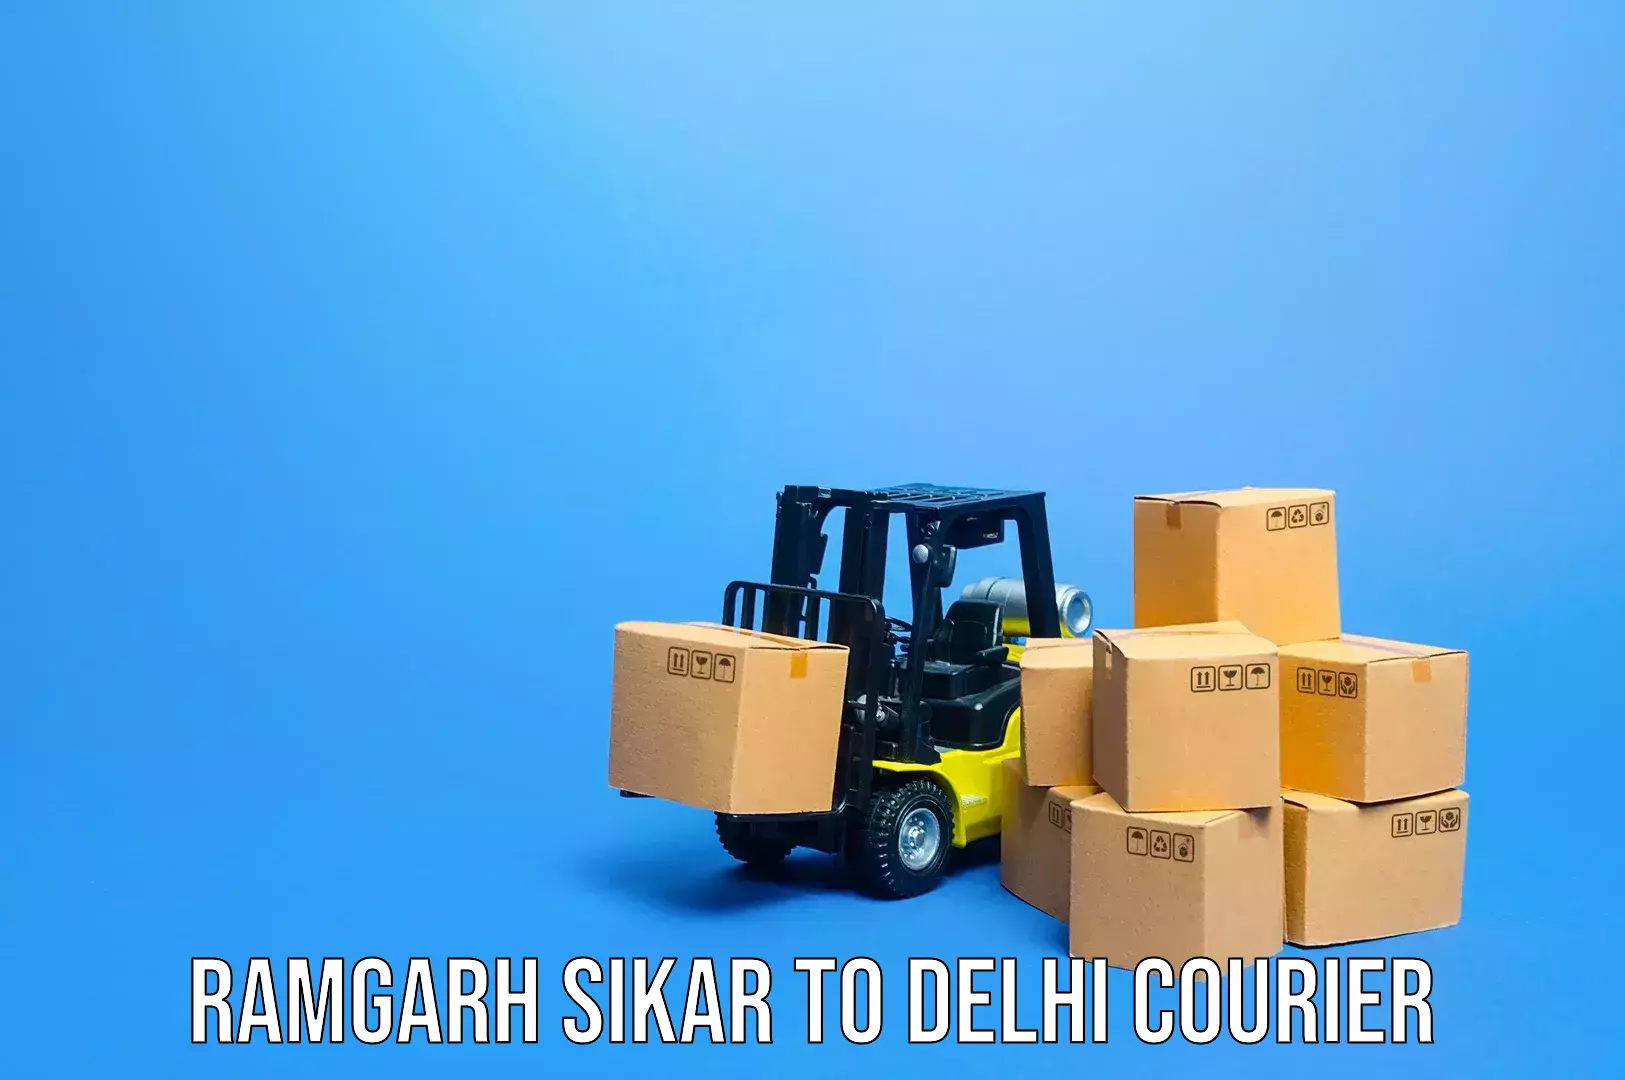 Luggage shipping service Ramgarh Sikar to NCR